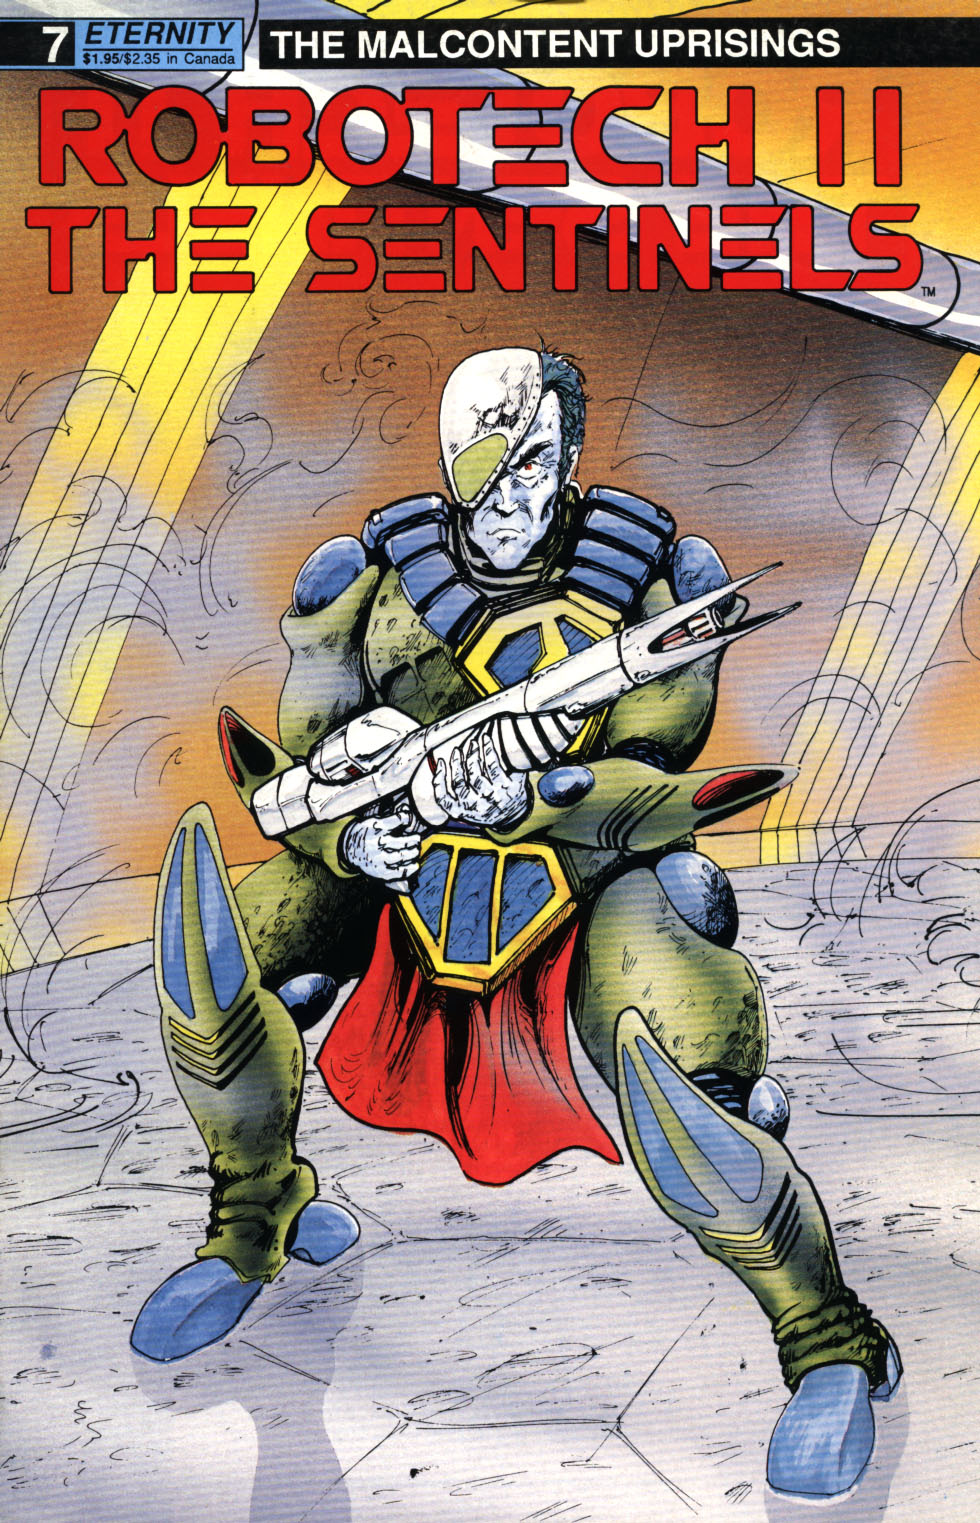 Read online Robotech II: The Sentinels - The Malcontent Uprisings comic -  Issue #7 - 1